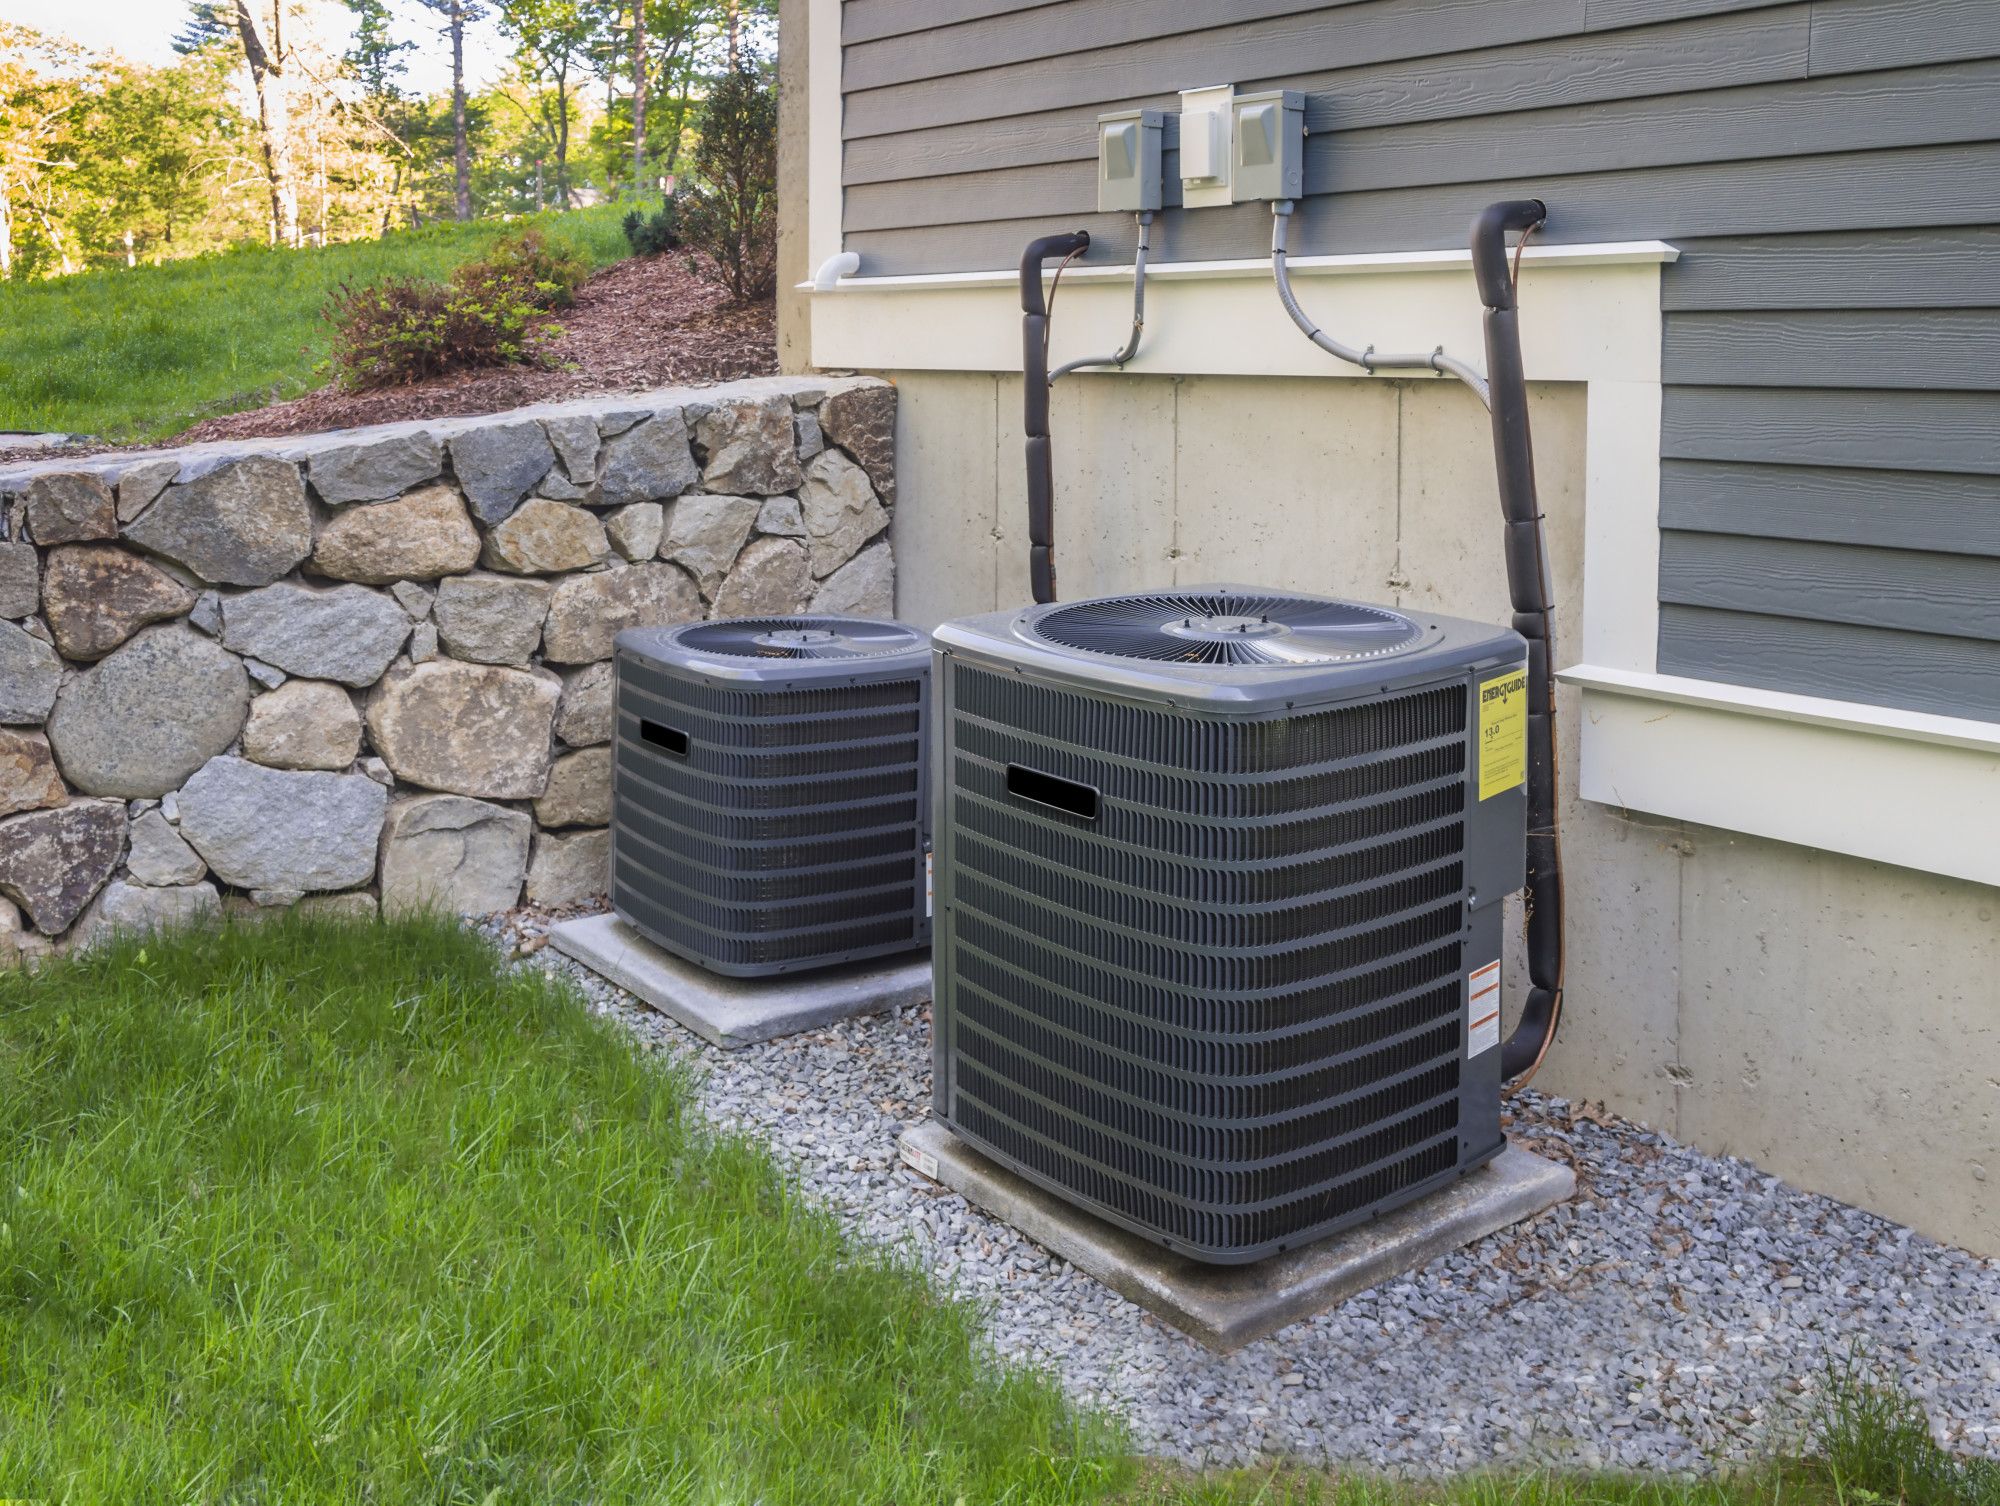 What to Do About a Frozen Heat Pump in Winter